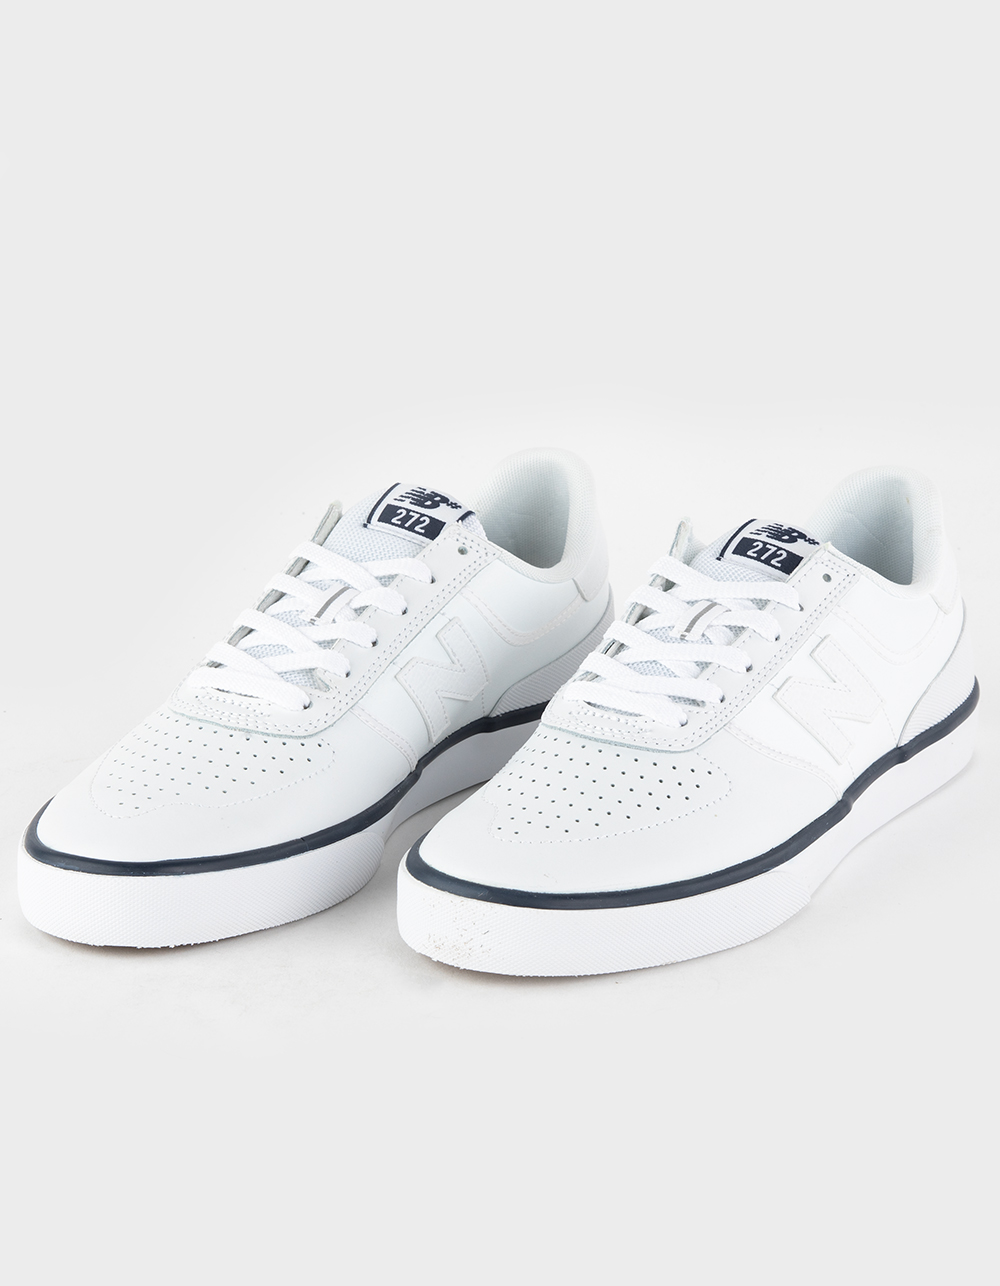 NEW BALANCE 272 Mens Shoes - WHITE | Tillys